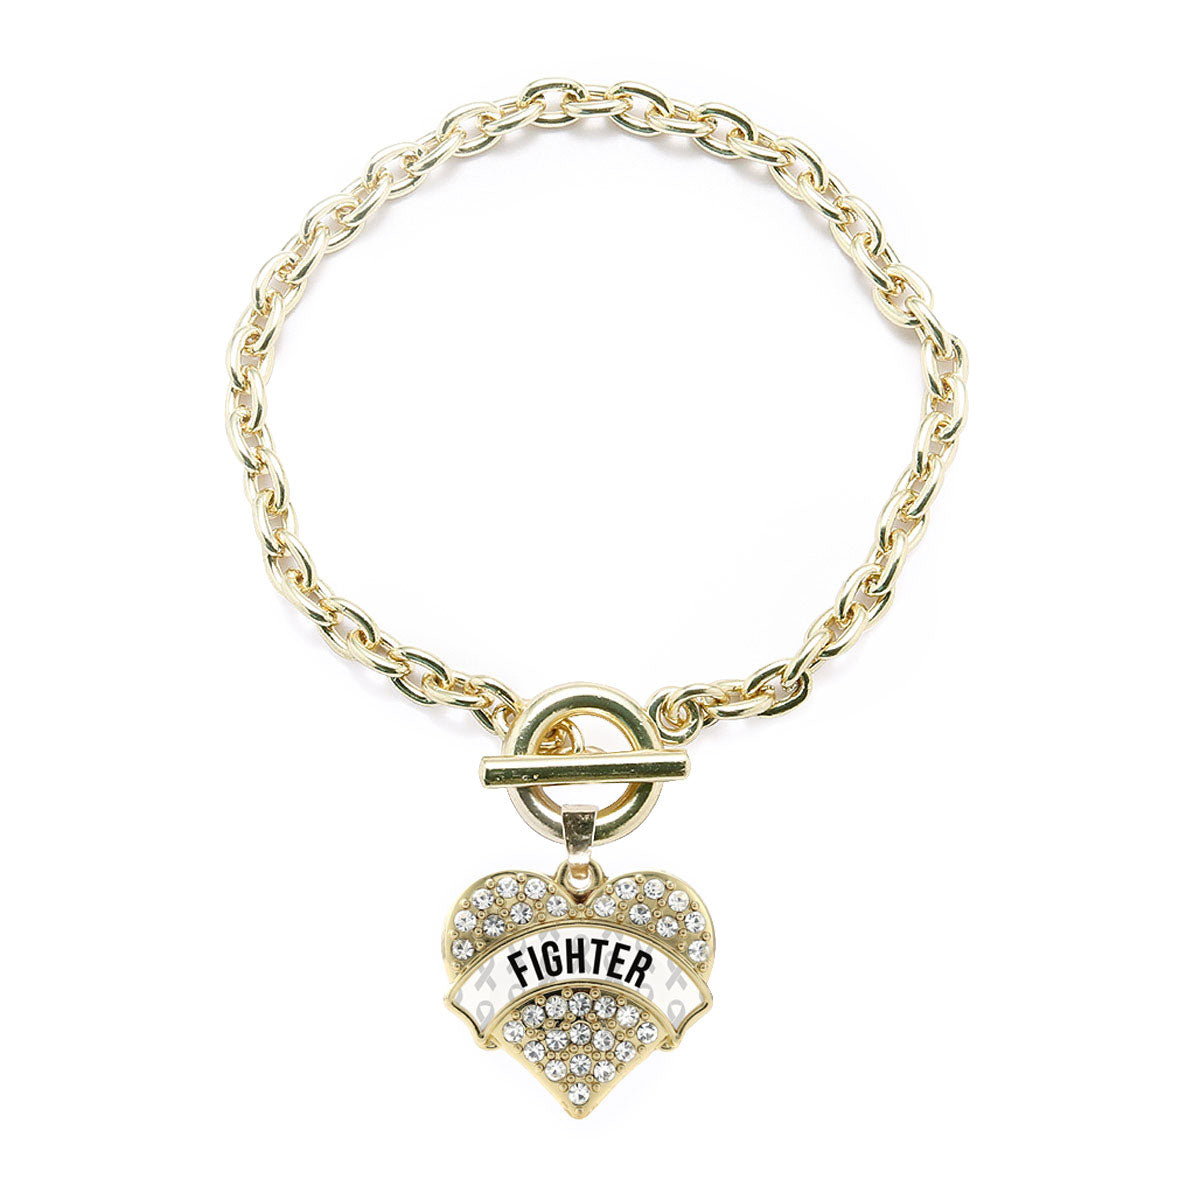 Gold White Fighter Pave Heart Charm Toggle Bracelet